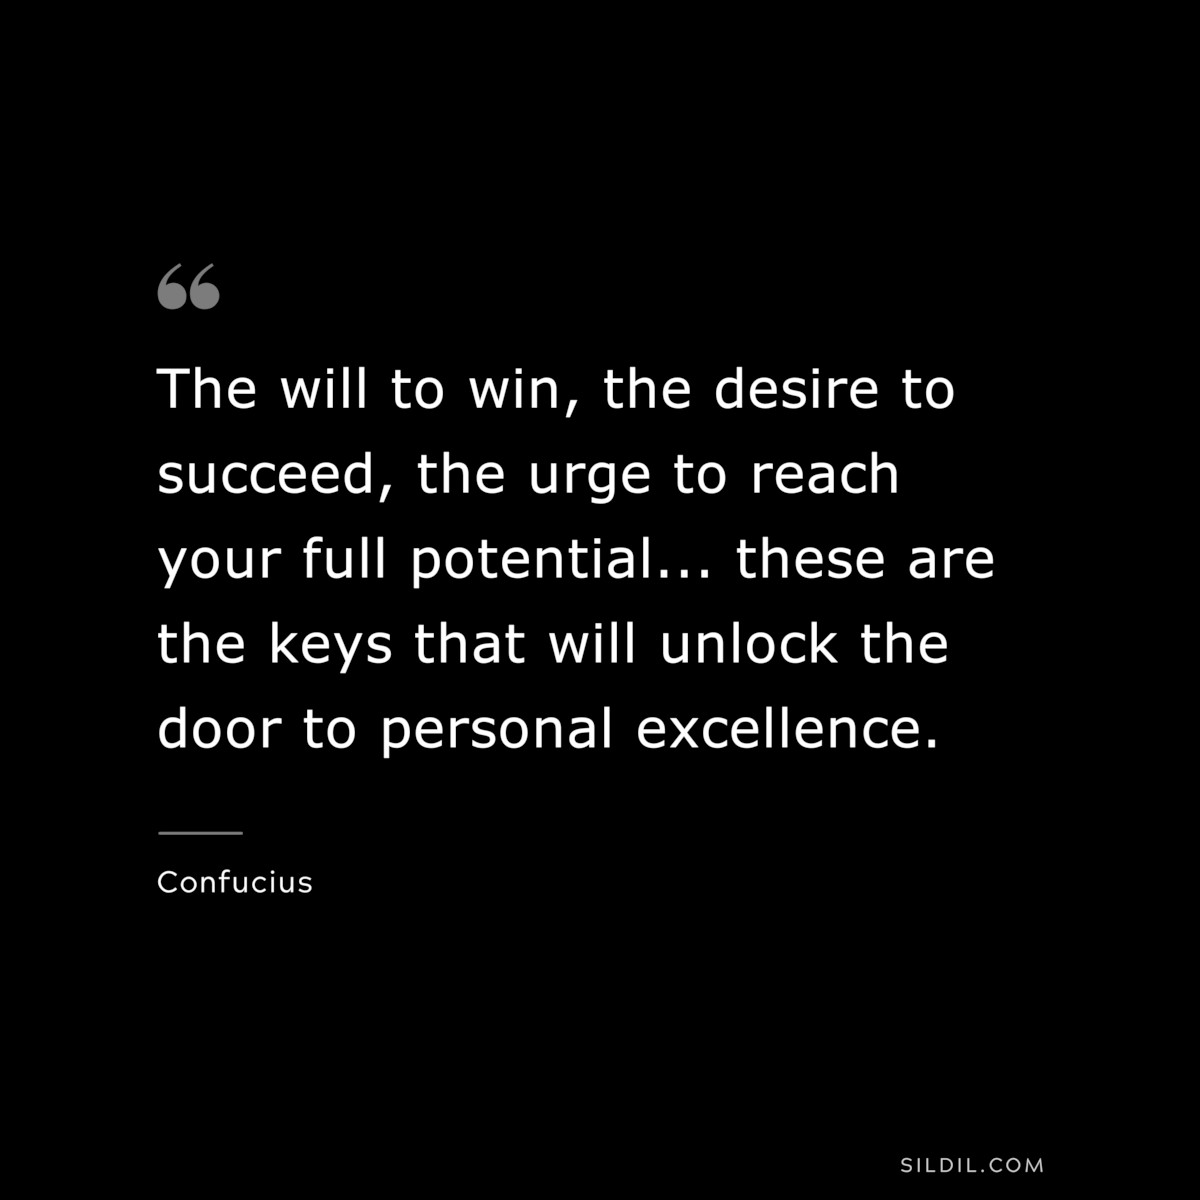 The will to win, the desire to succeed, the urge to reach your full potential... these are the keys that will unlock the door to personal excellence. ― Confucius